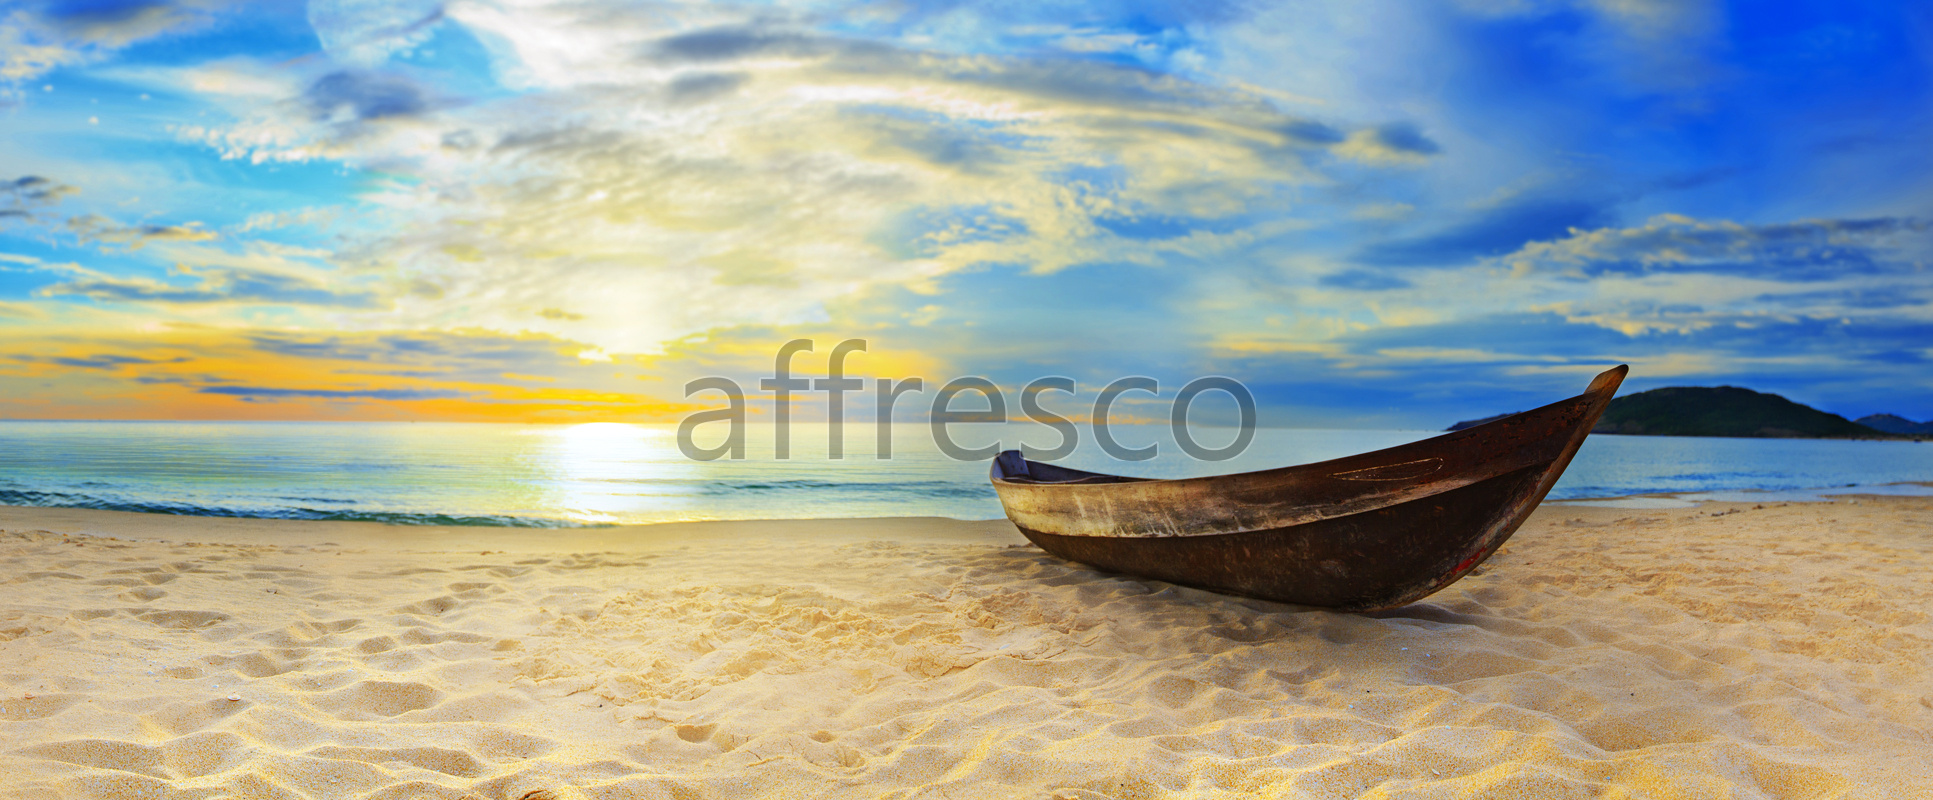 ID11143 | Pictures of Nature  | Launch at the beach | Affresco Factory